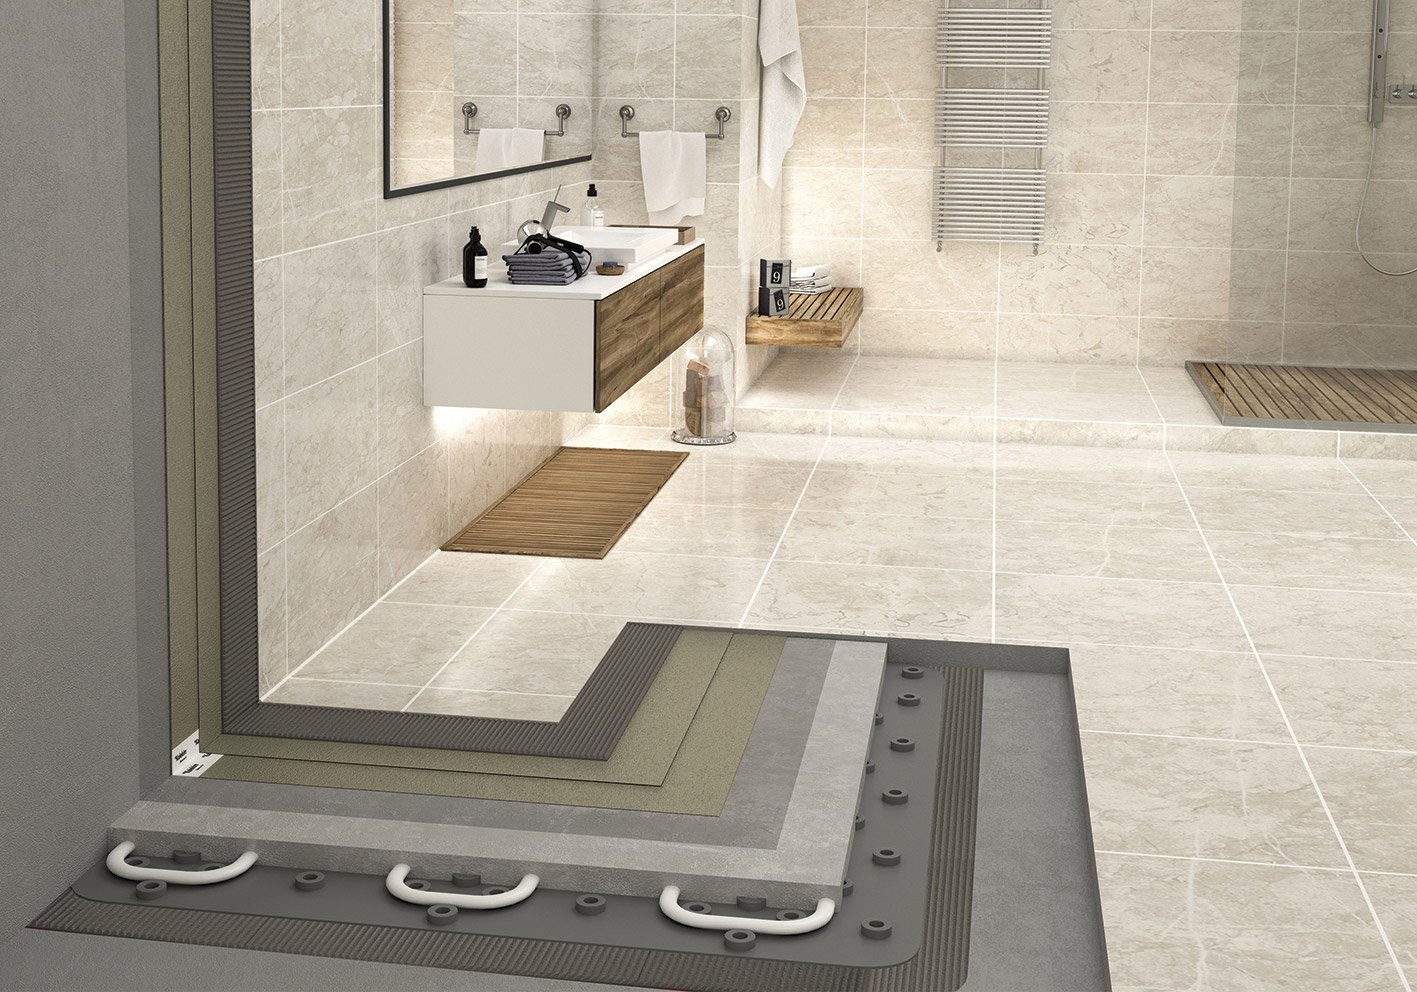 Solutions for Waterproofing & Ceramic Tile Application on Underfloor Heating Systems